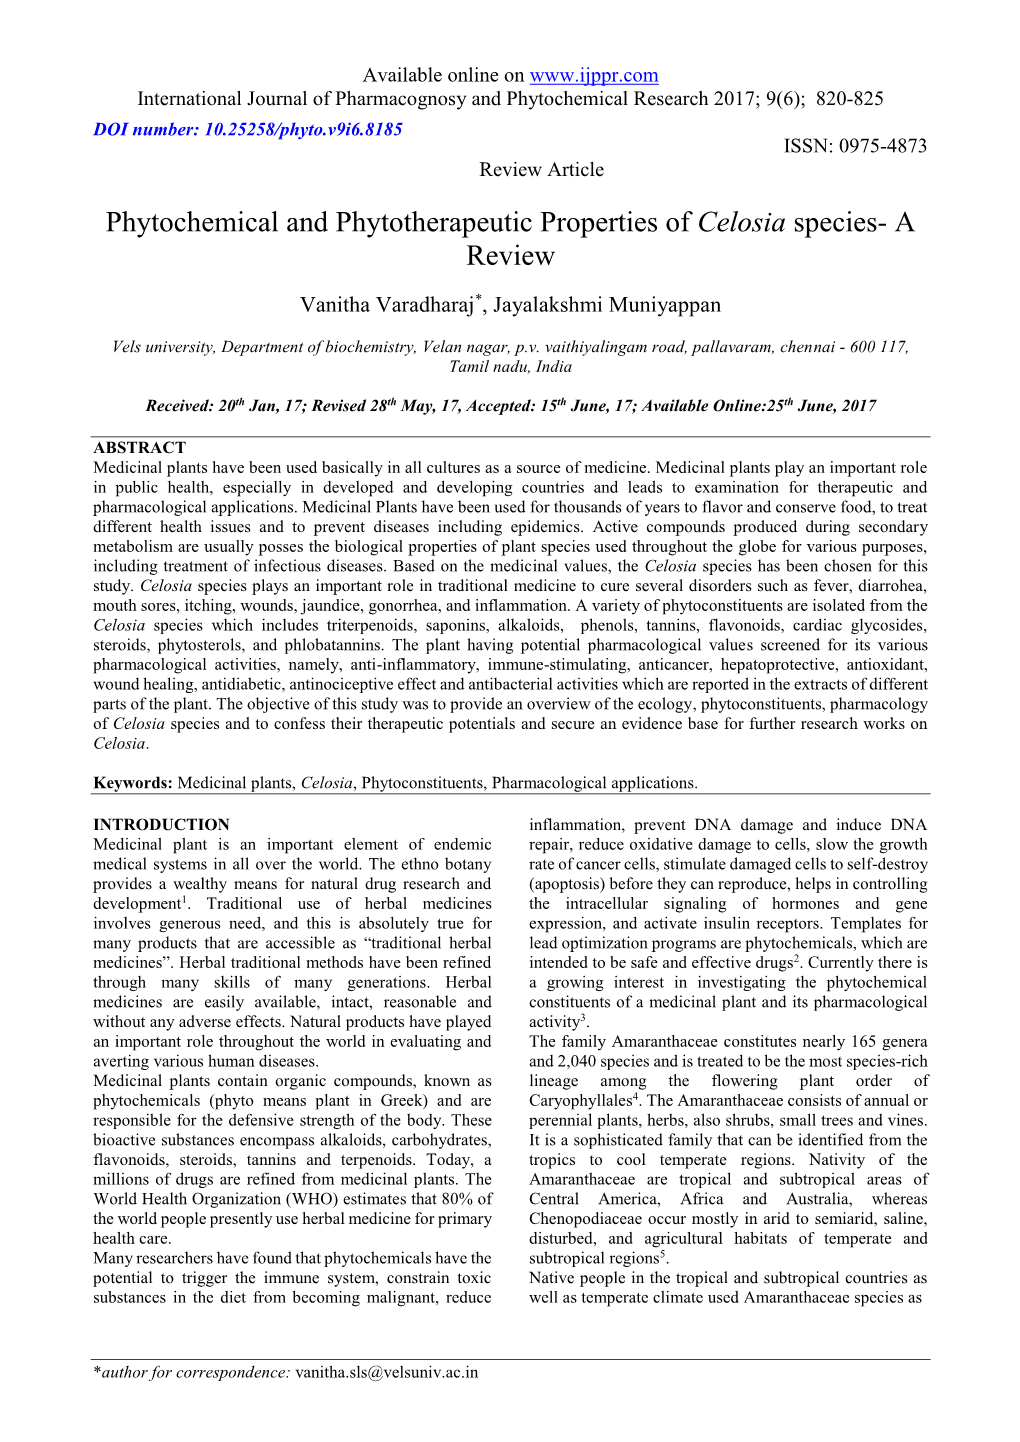 Phytochemical and Phytotherapeutic Properties of Celosia Species- a Review